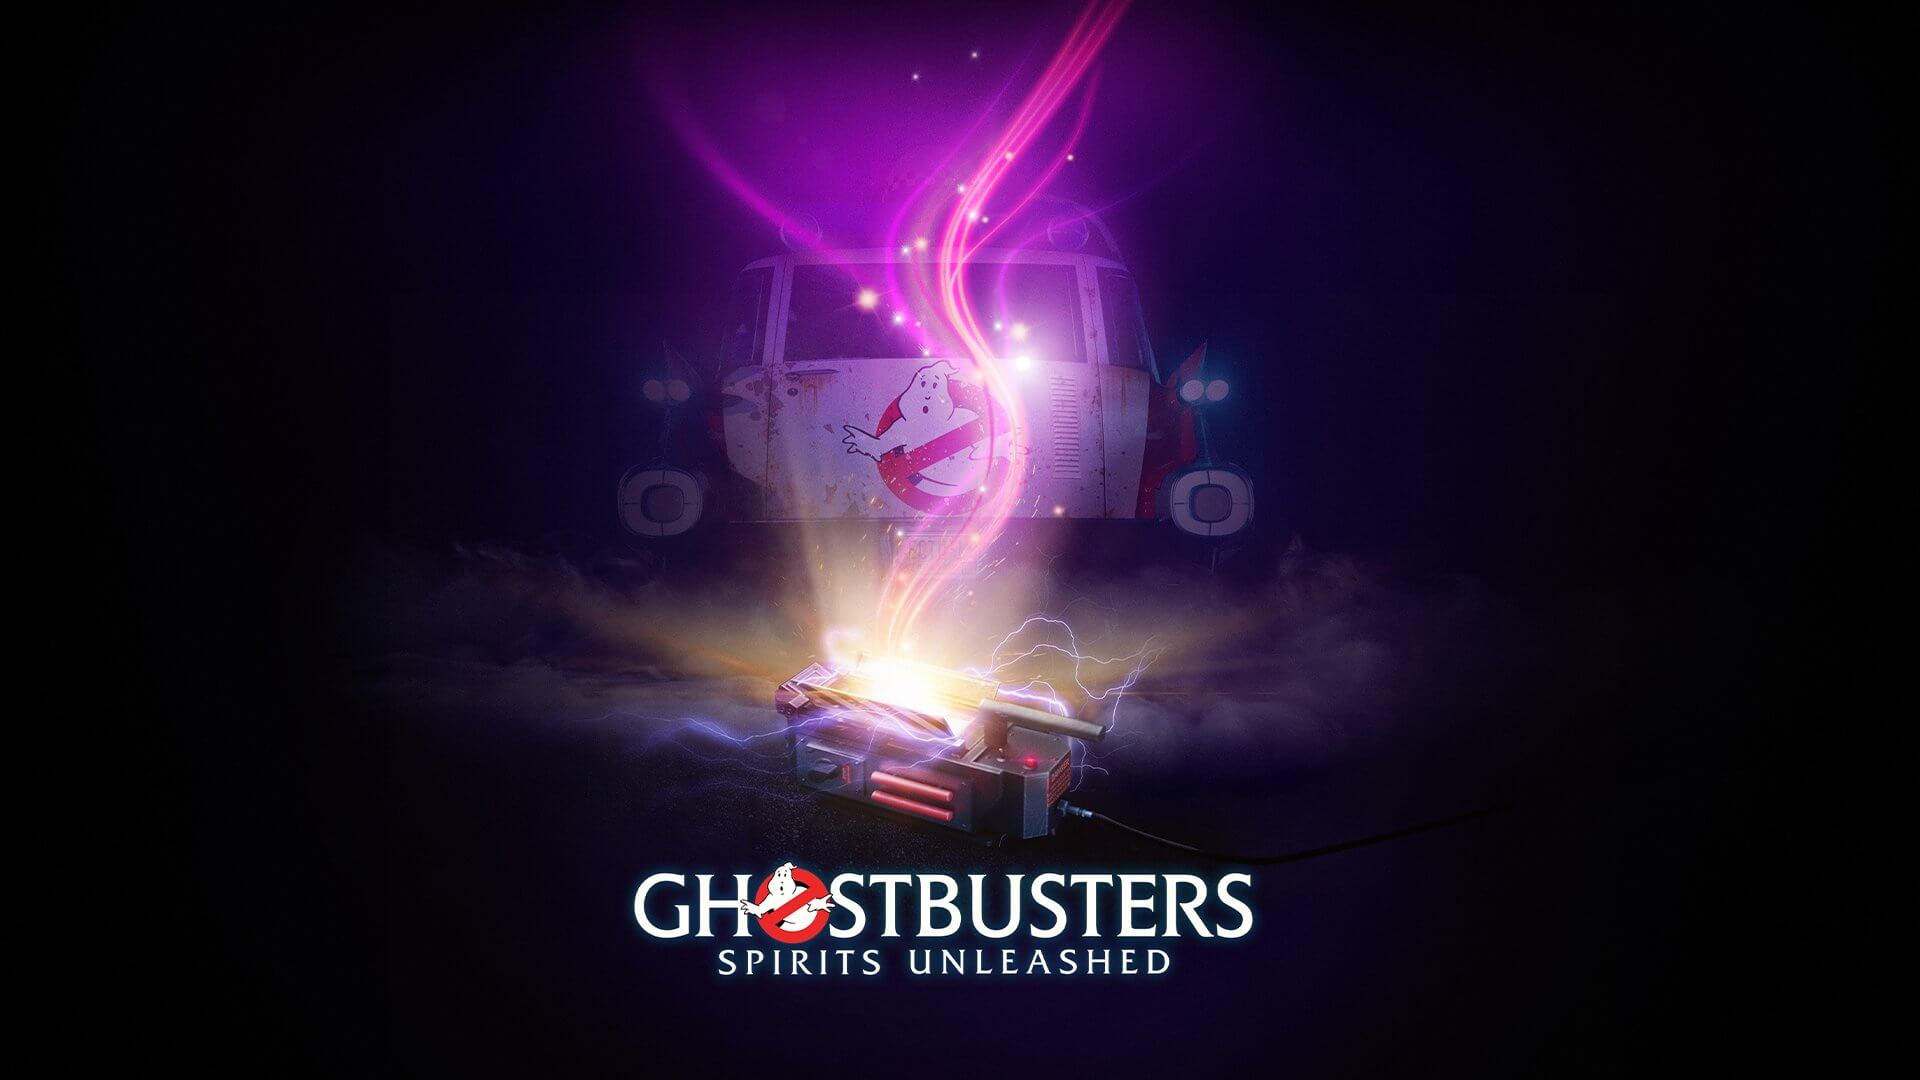 Ghostbusters: Spirits Unleashed HD Wallpaper